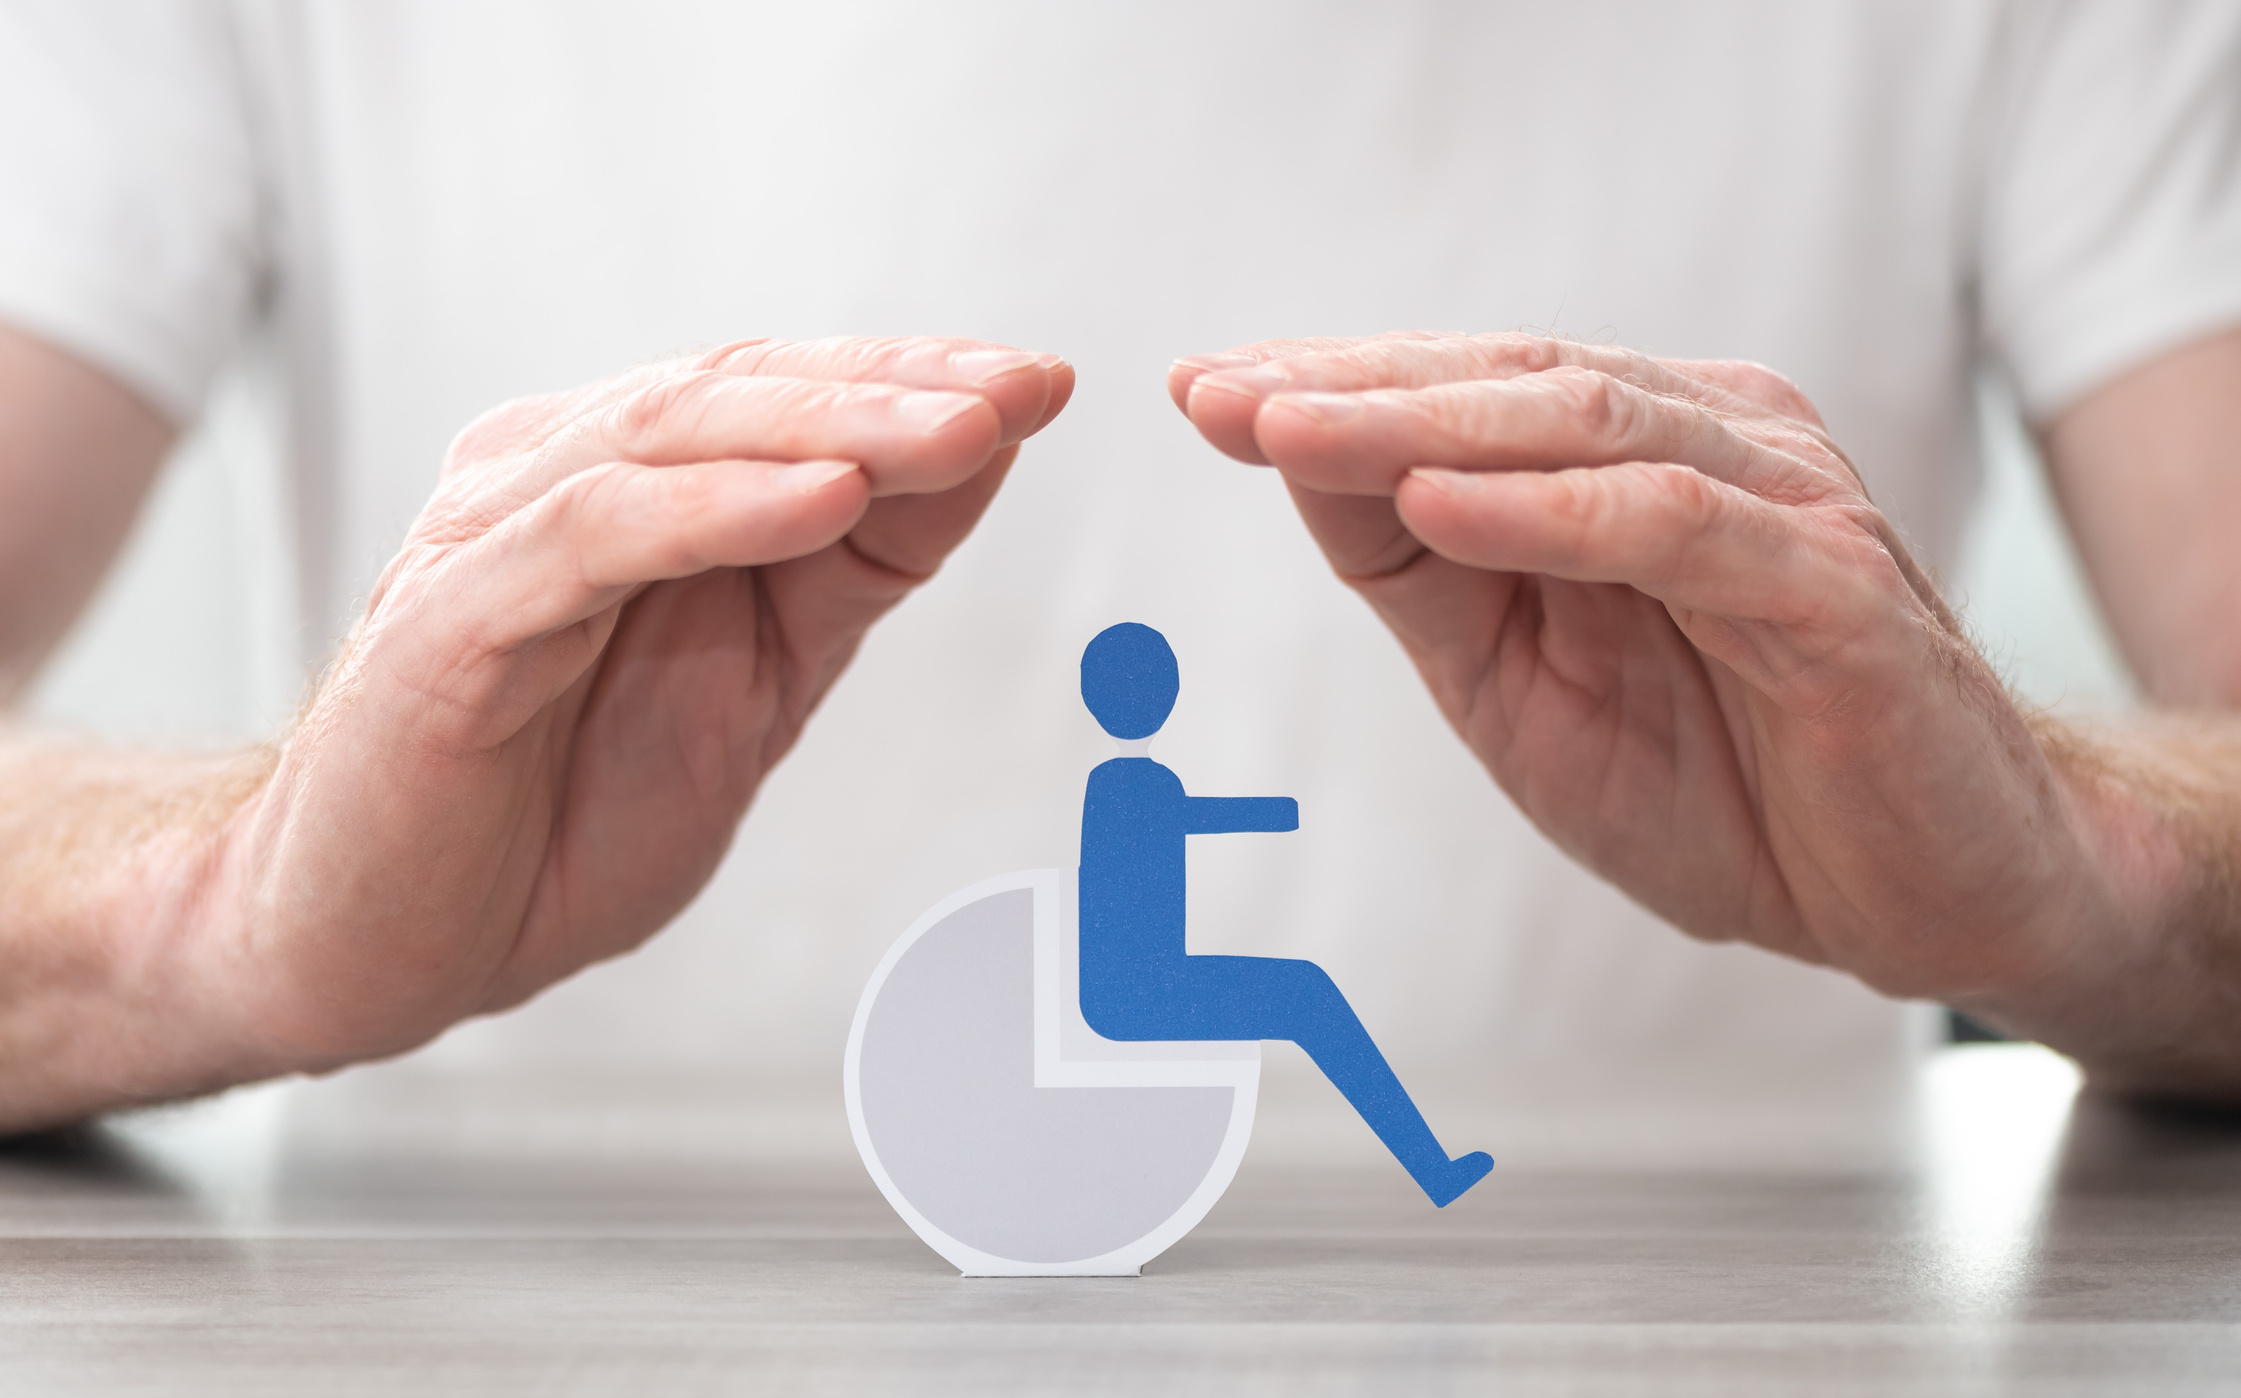 Concept of disability insurance